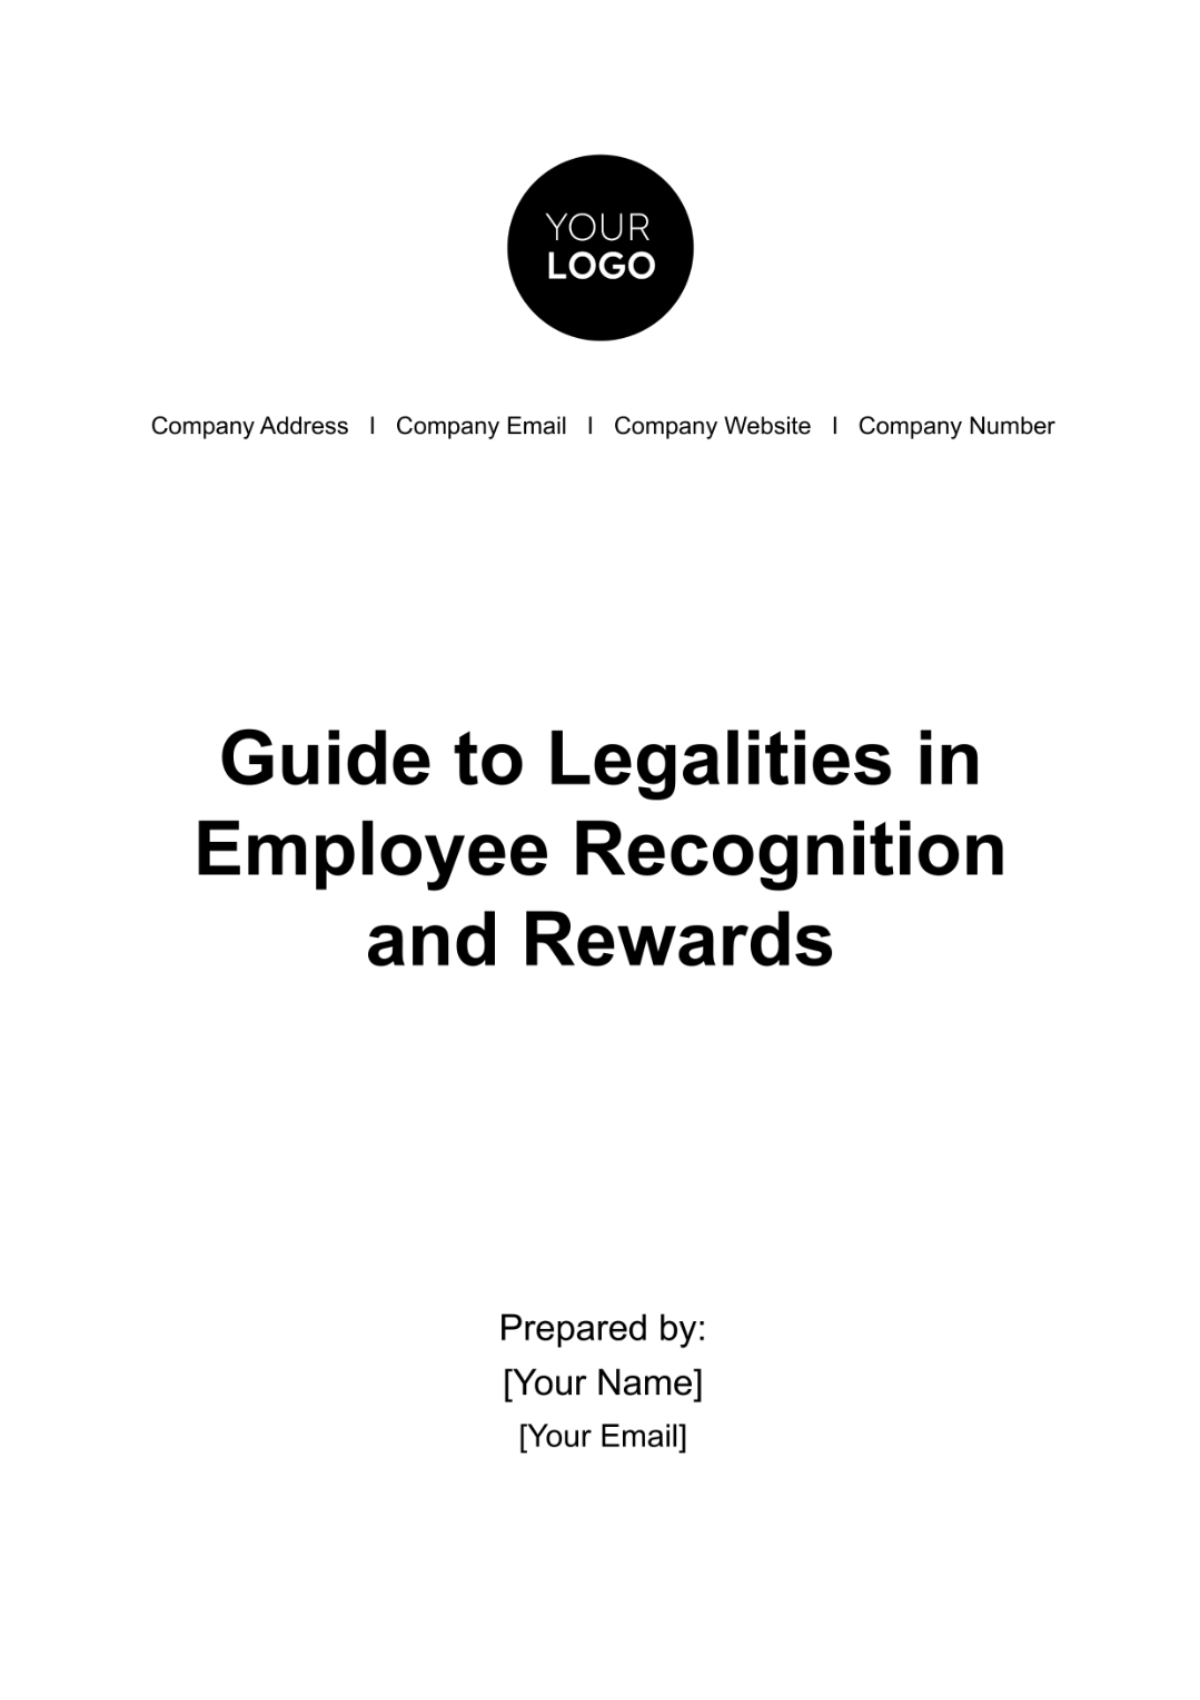 Free Guide to Legalities in Employee Recognition and Rewards HR Template